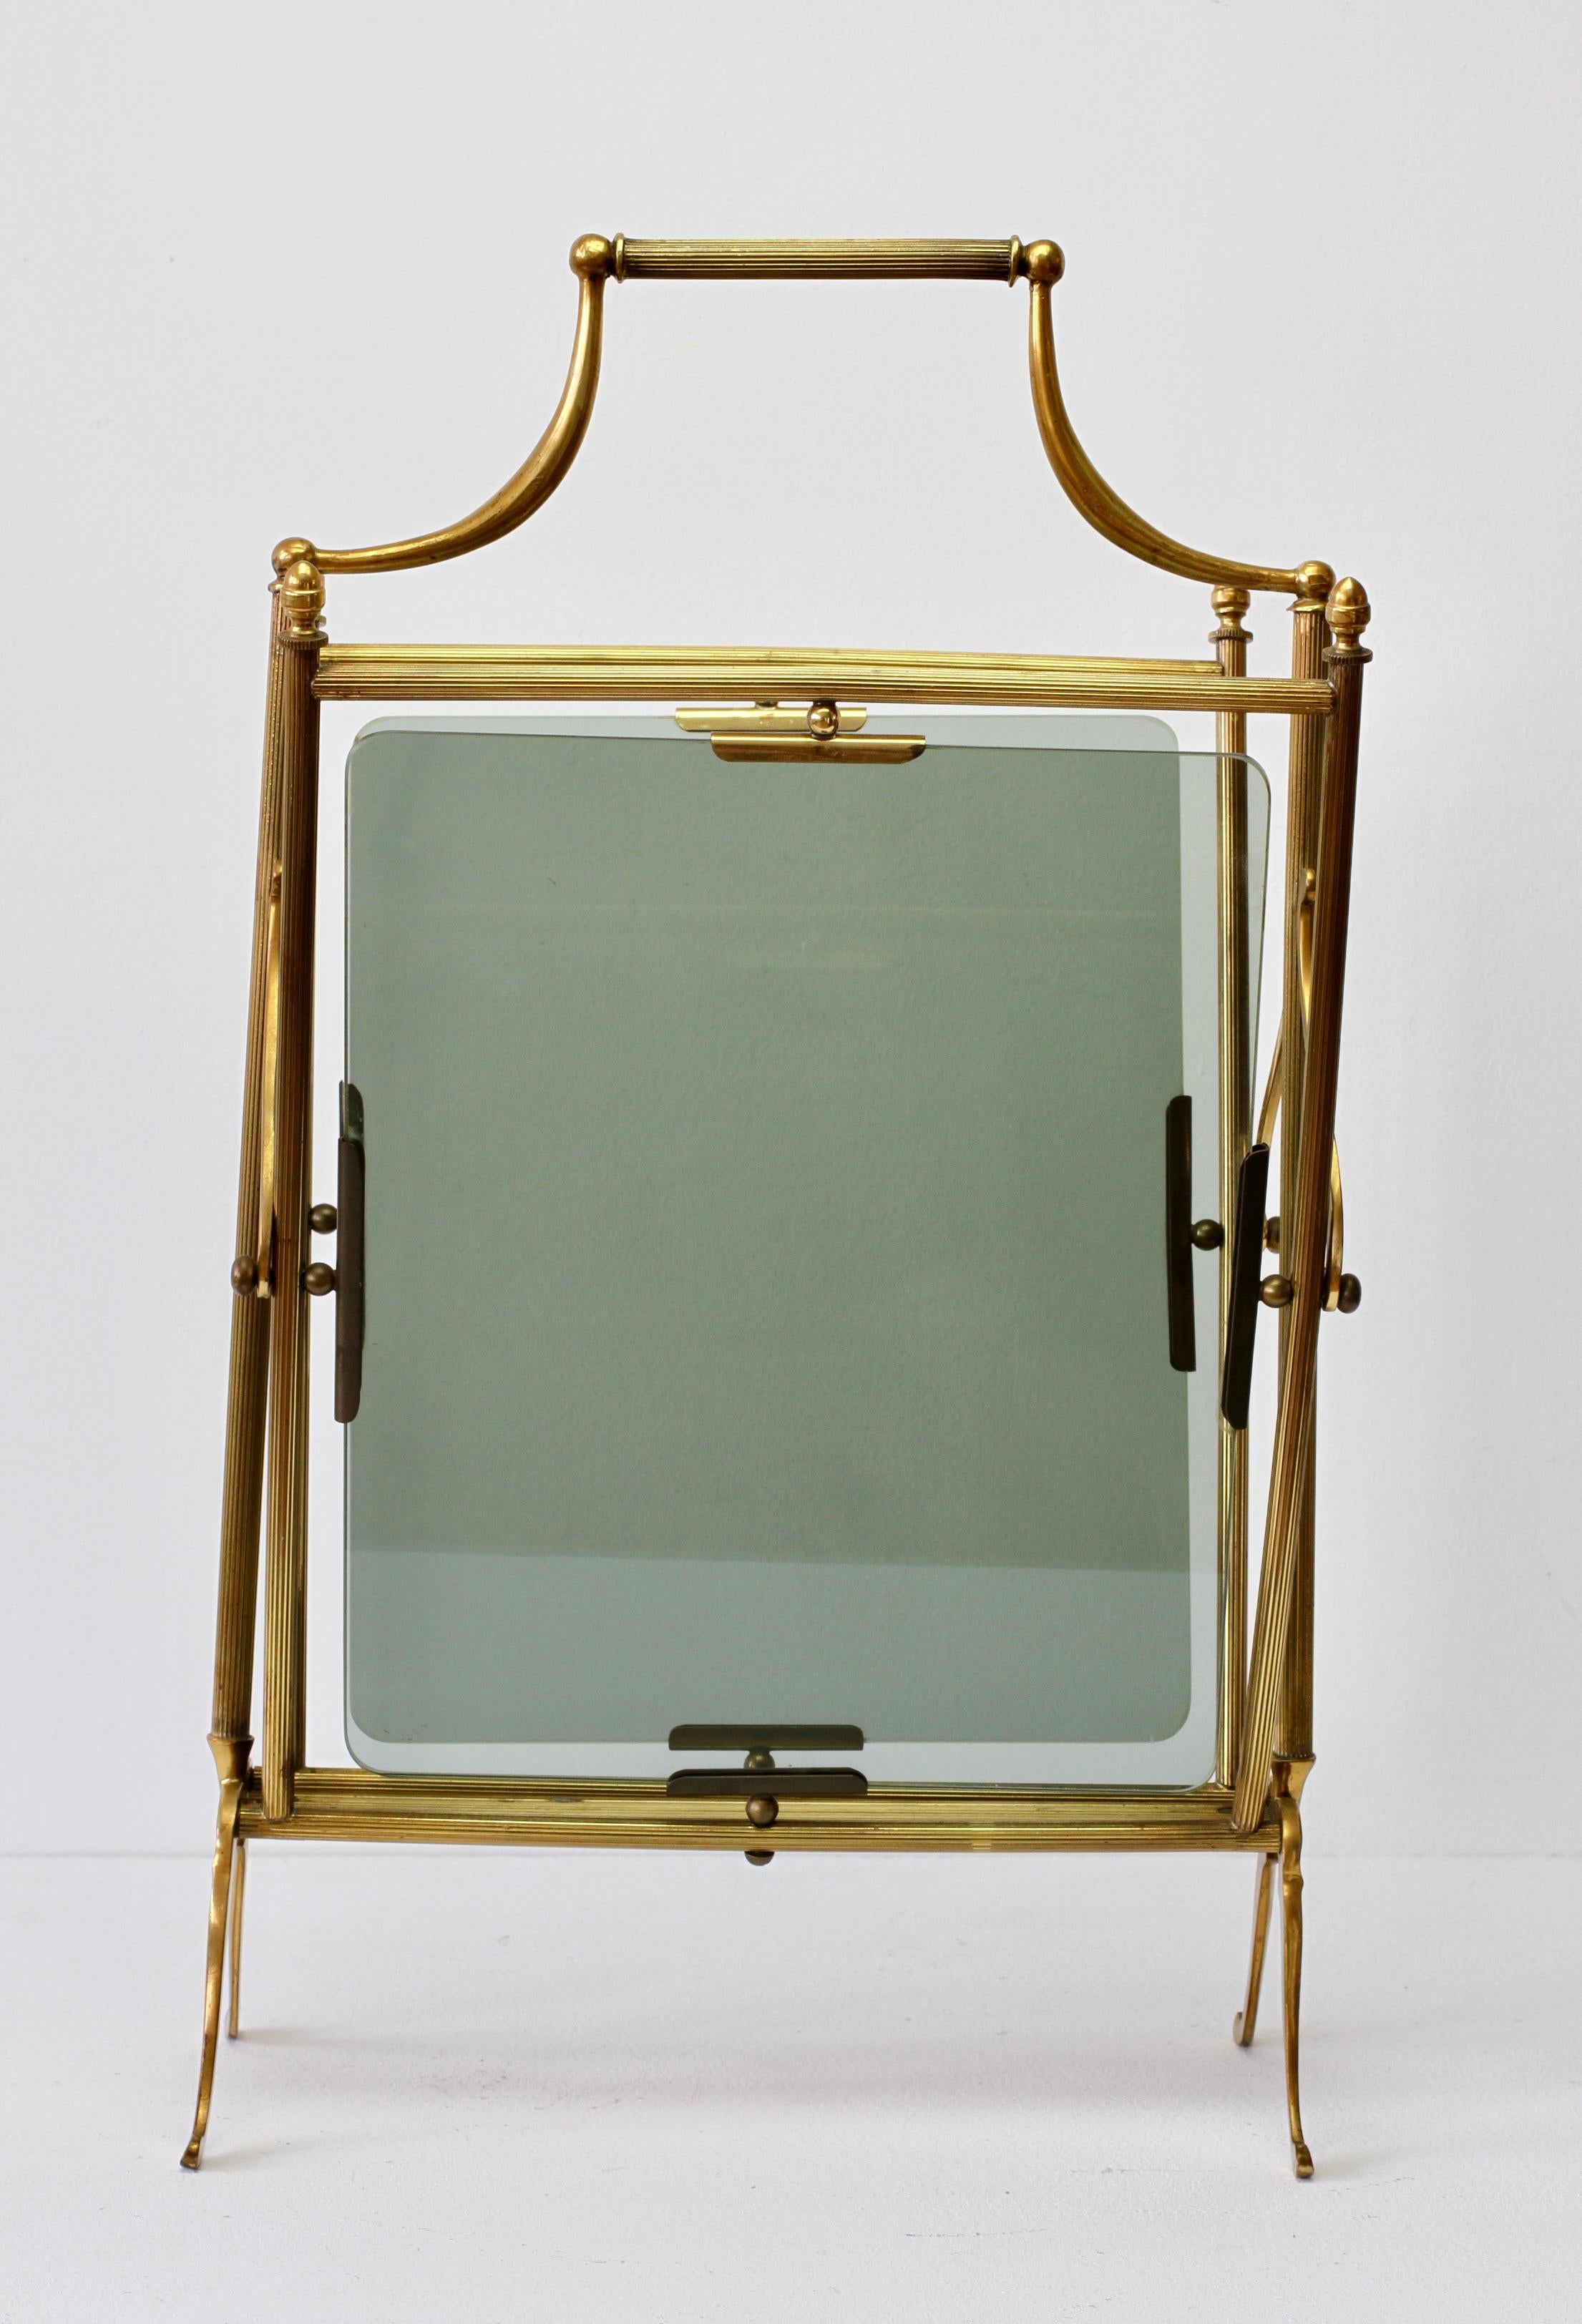 Maison Baguès ‘Attributed' Brass & Toned Glass Magazine Rack / Newspaper Stand For Sale 4